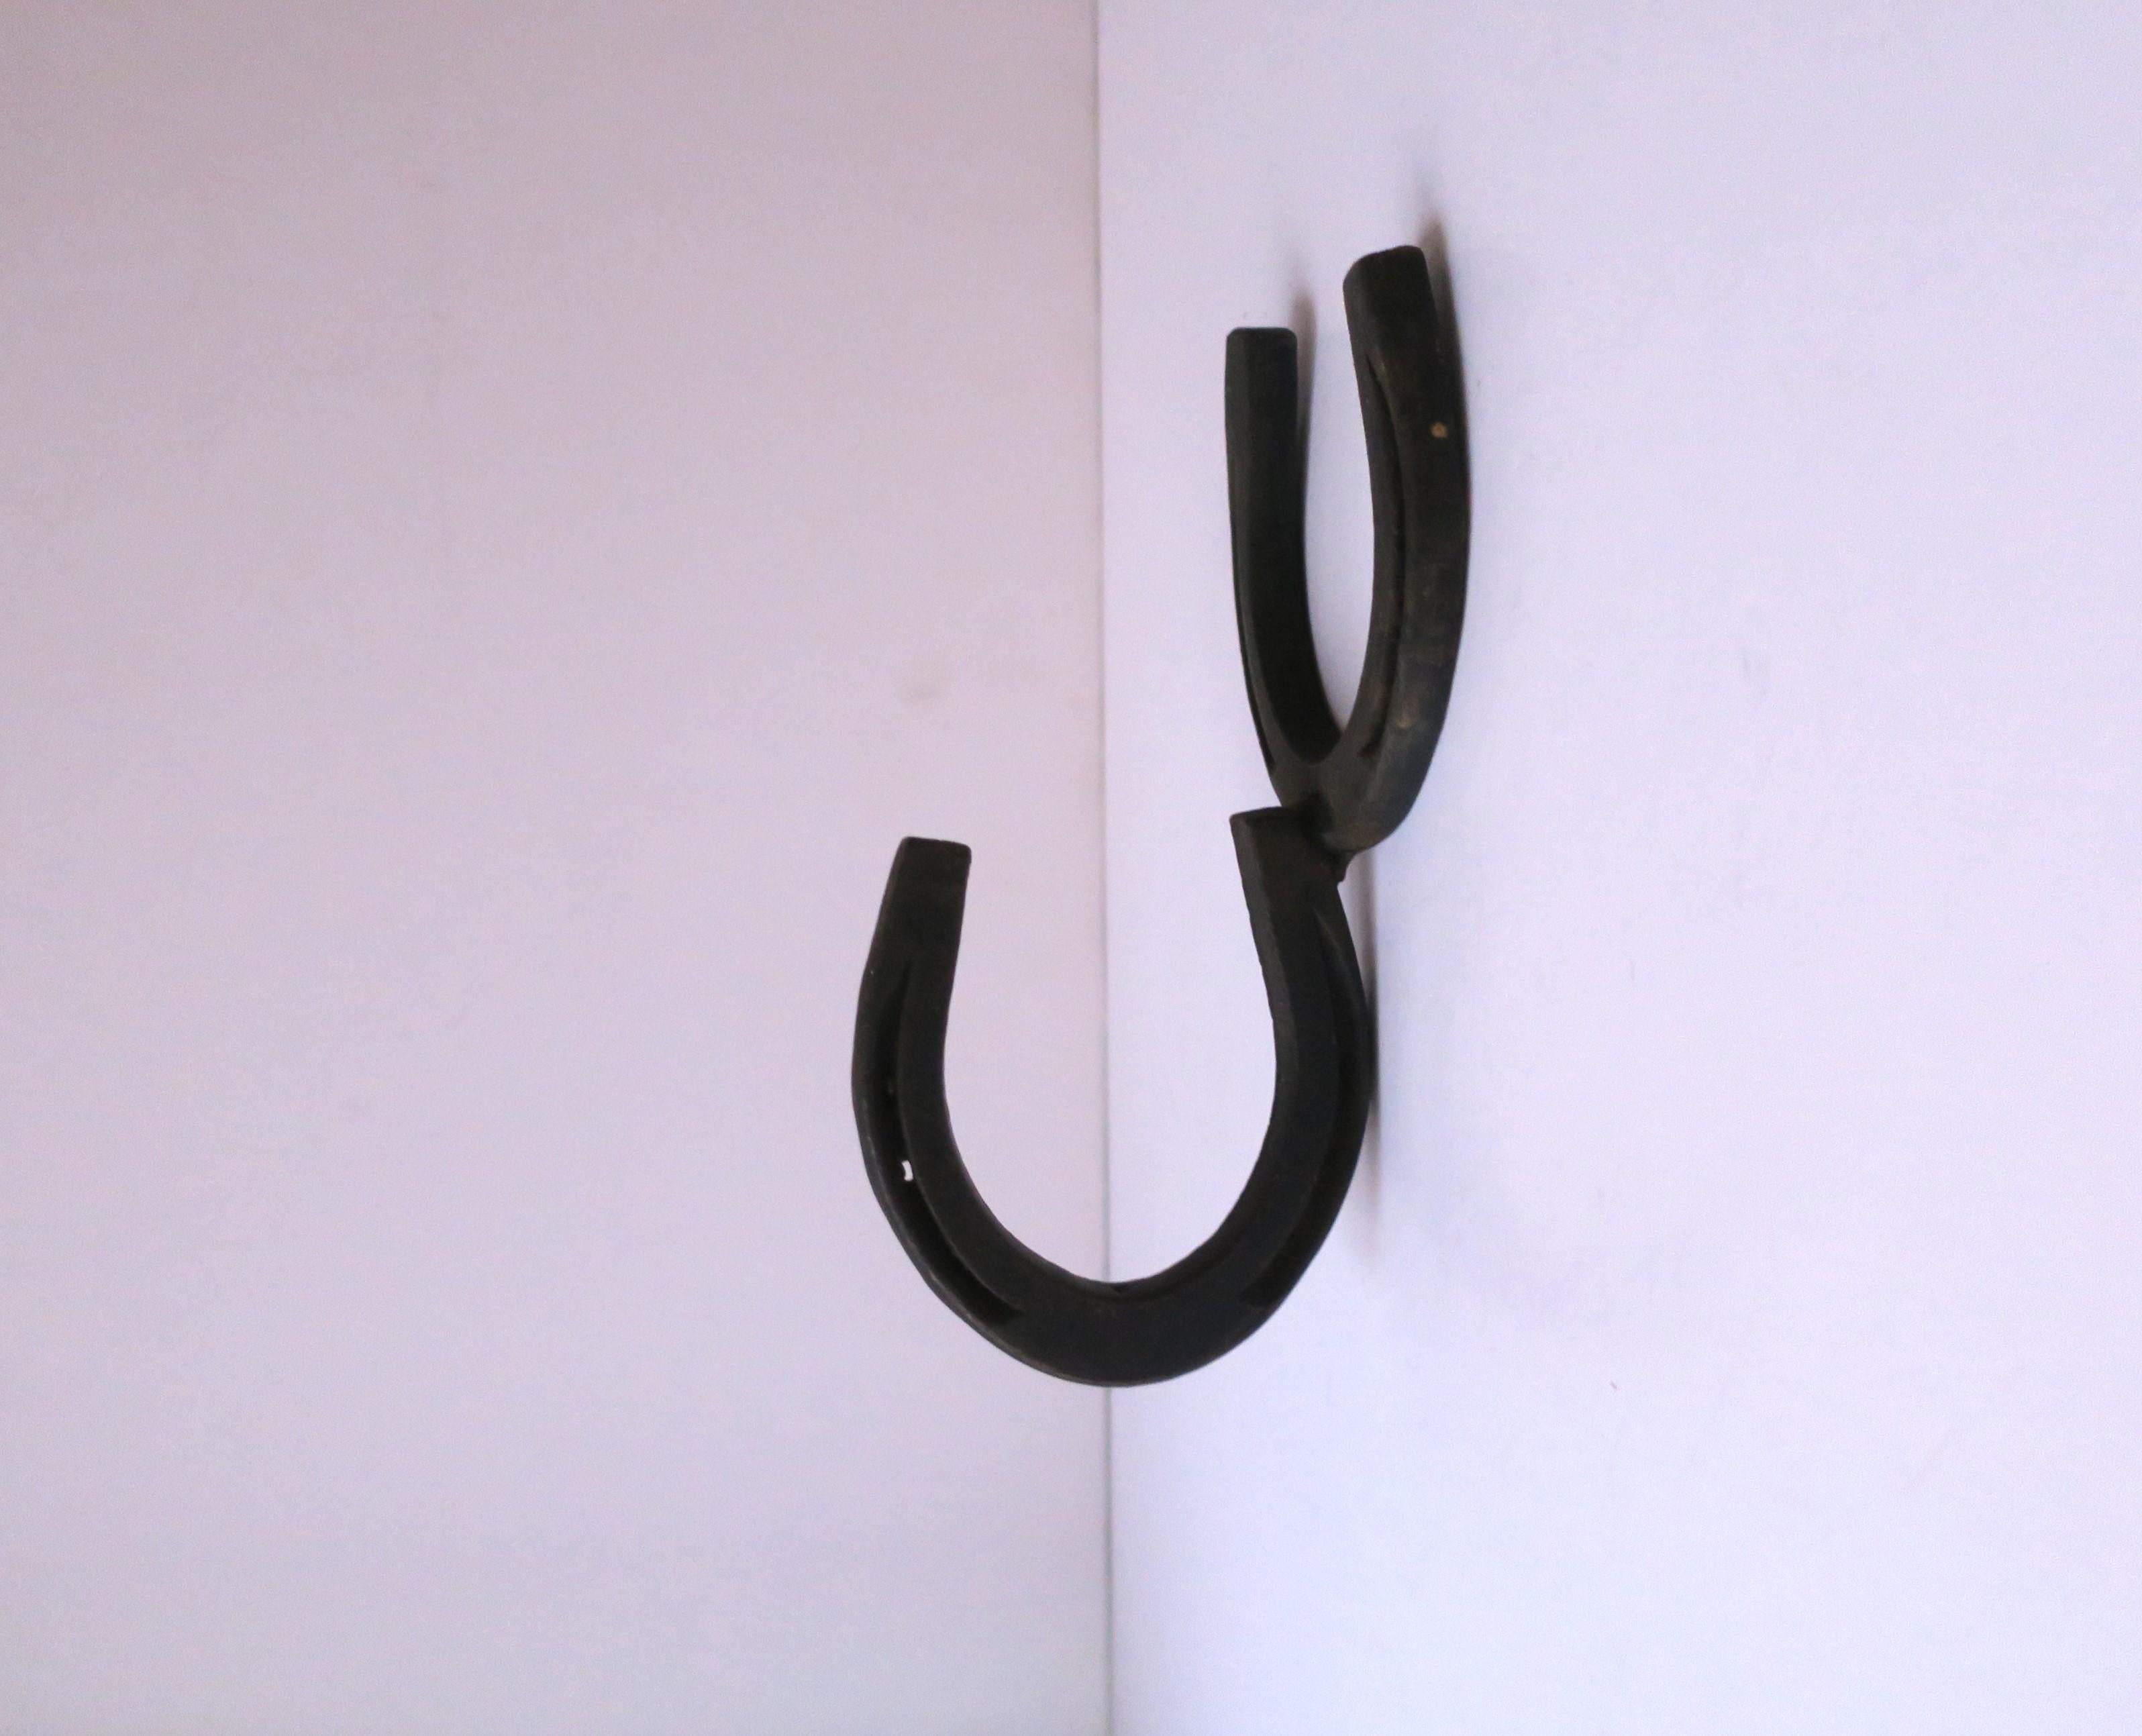 A steel pony horseshoe wall hook, circa early-20th century., USA. A great piece for a barn, kitchen, foyer, mud room, residential or commercial projects/hotel, etc. Dimensions: 3.25